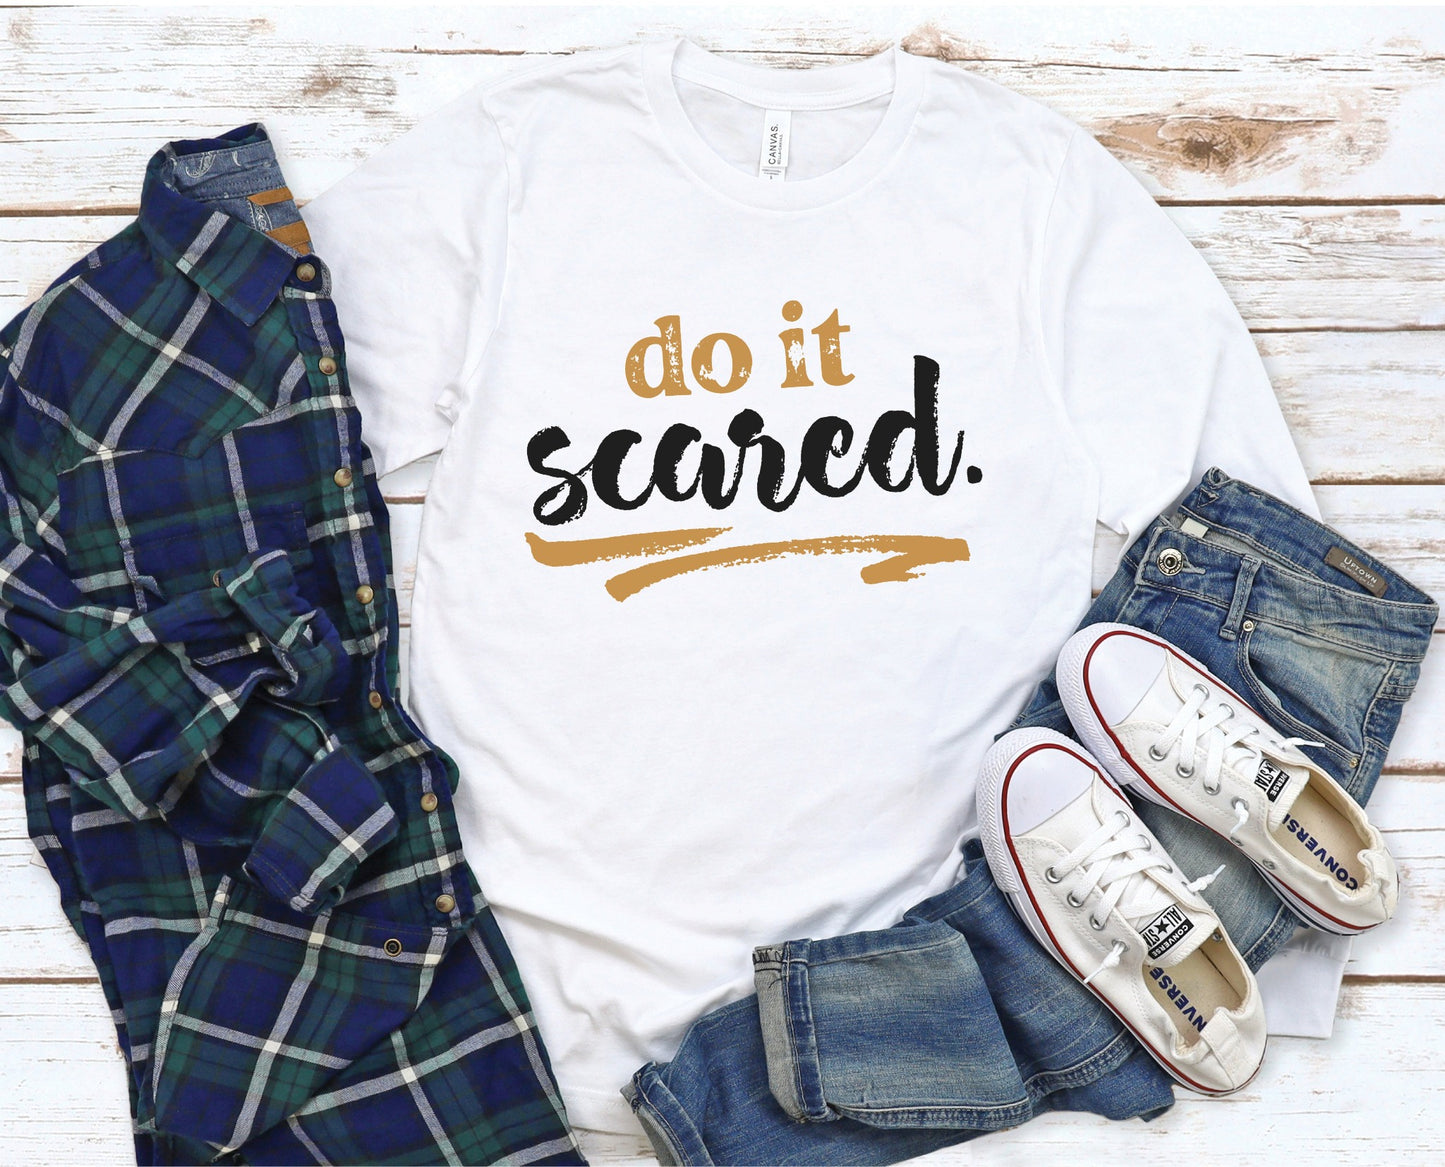 Do It Scared faith over fear 2 Timothy 1:7 do not fear bible verse Christian aesthetic design printed in black and gold on soft white unisex long sleeve tee shirt for women and men